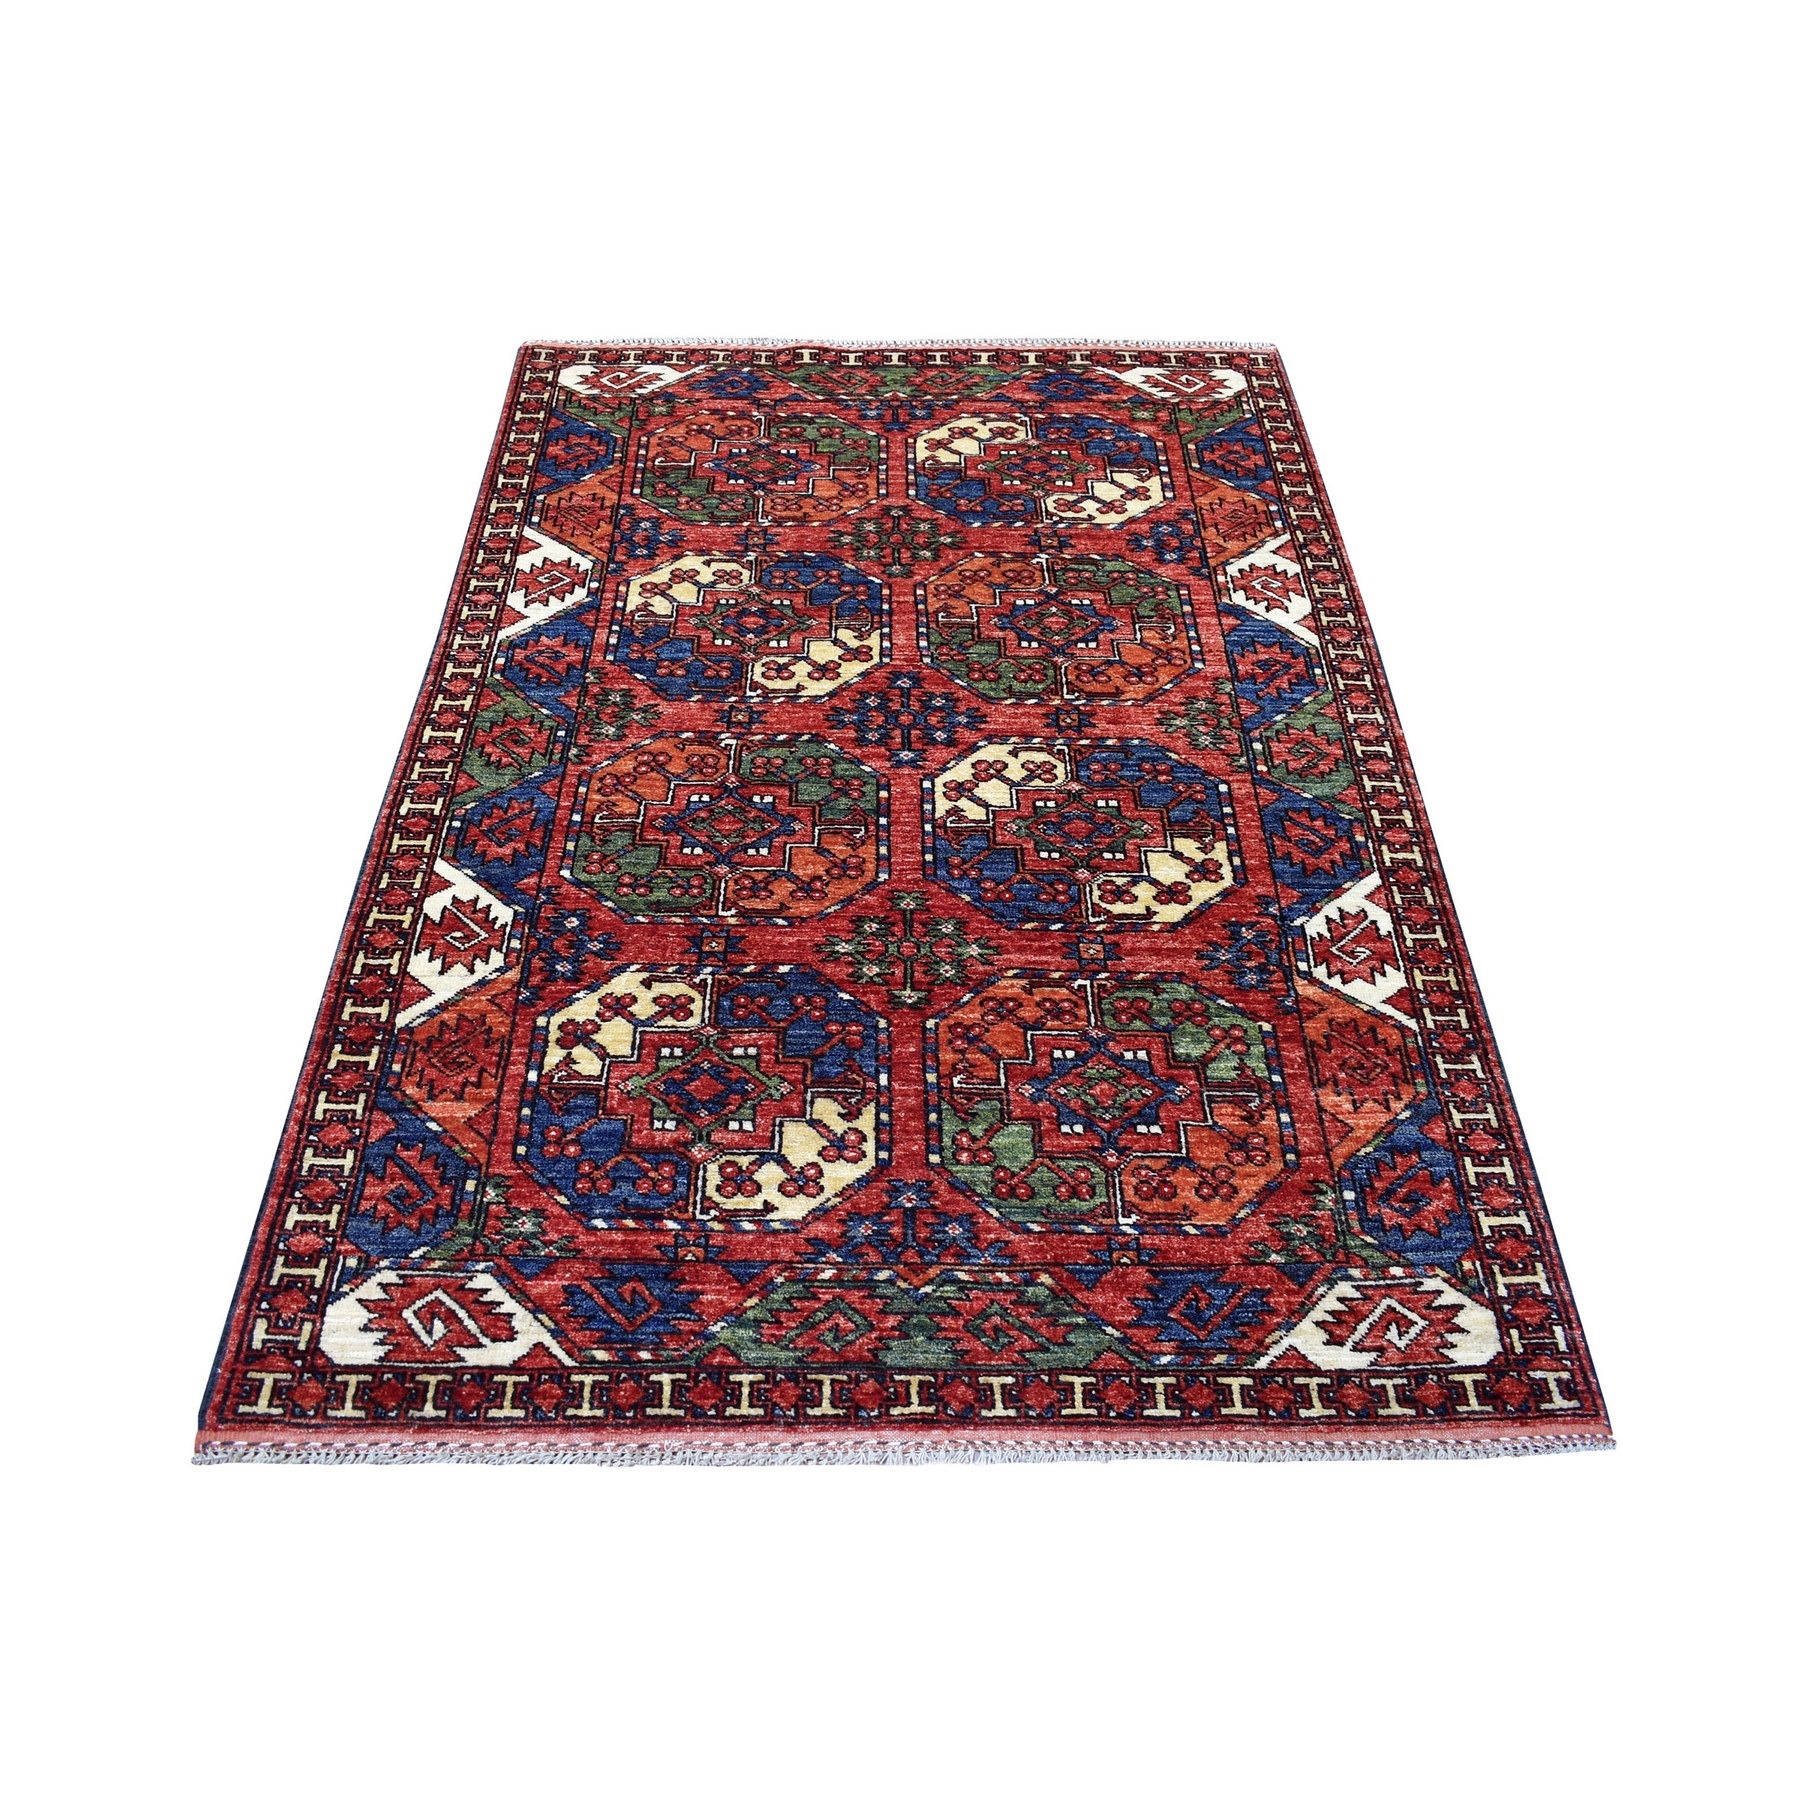 Nomadic And Village Collection Hand Knotted Red Rug No: 1134440